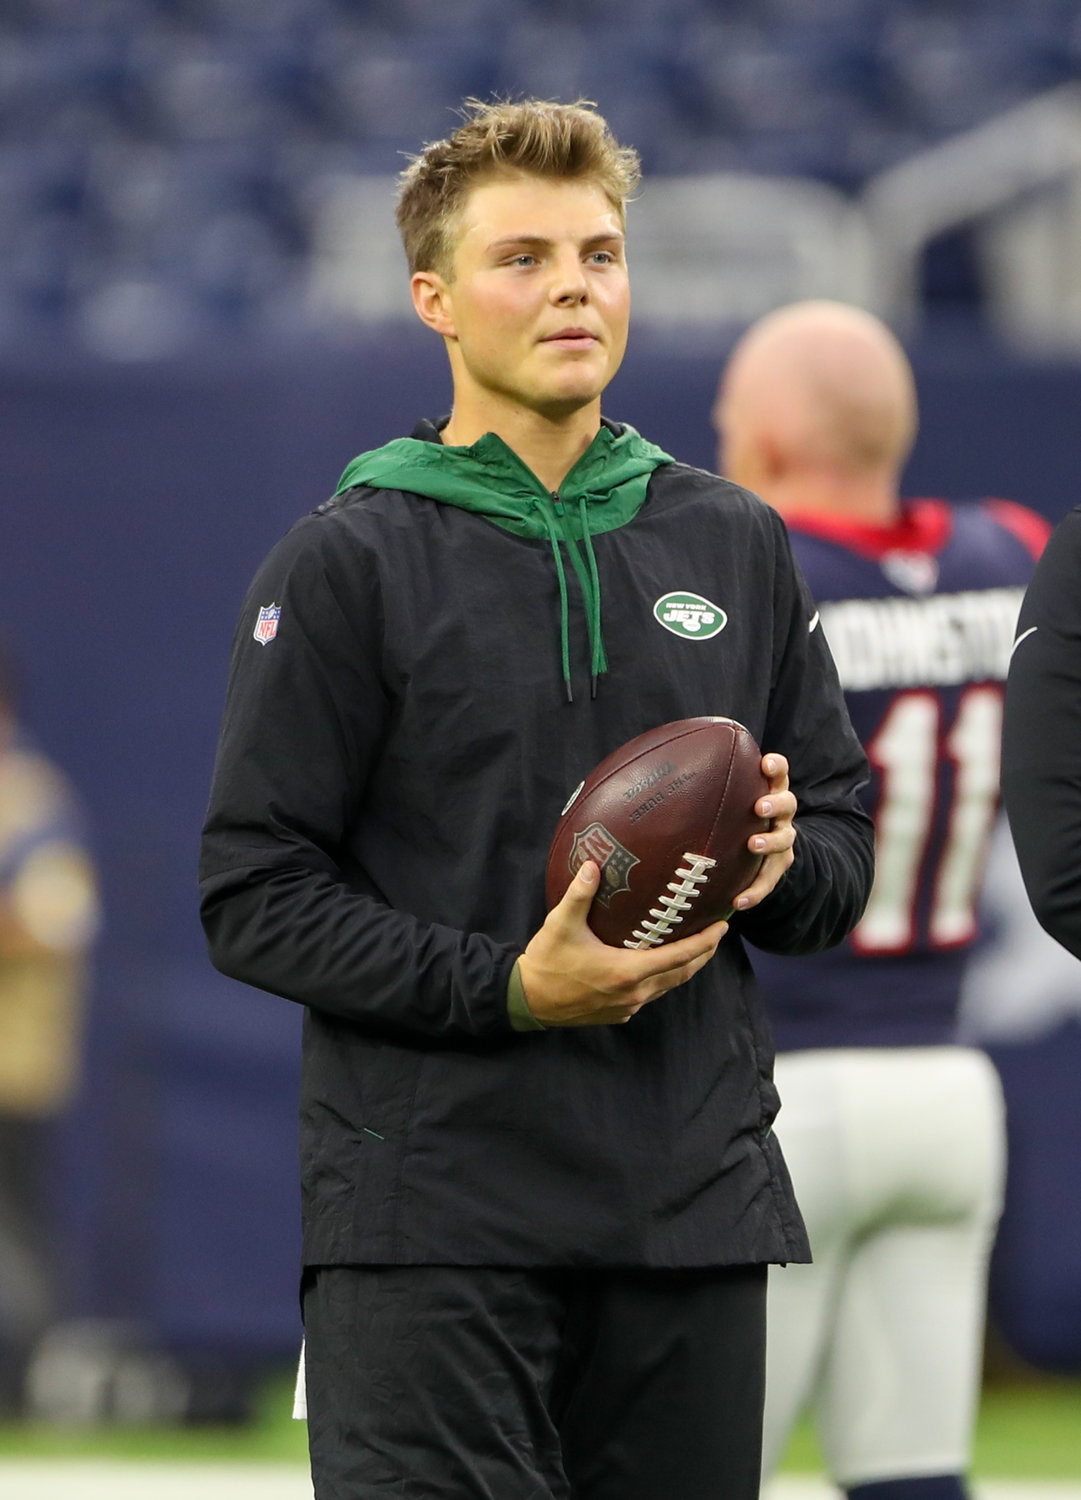 New York Jets quarterback Zach Wilson (2) during pregame warmups before an NFL game between the Houston Texans and the New York Jets on November 28, 2021 in Houston, Texas.